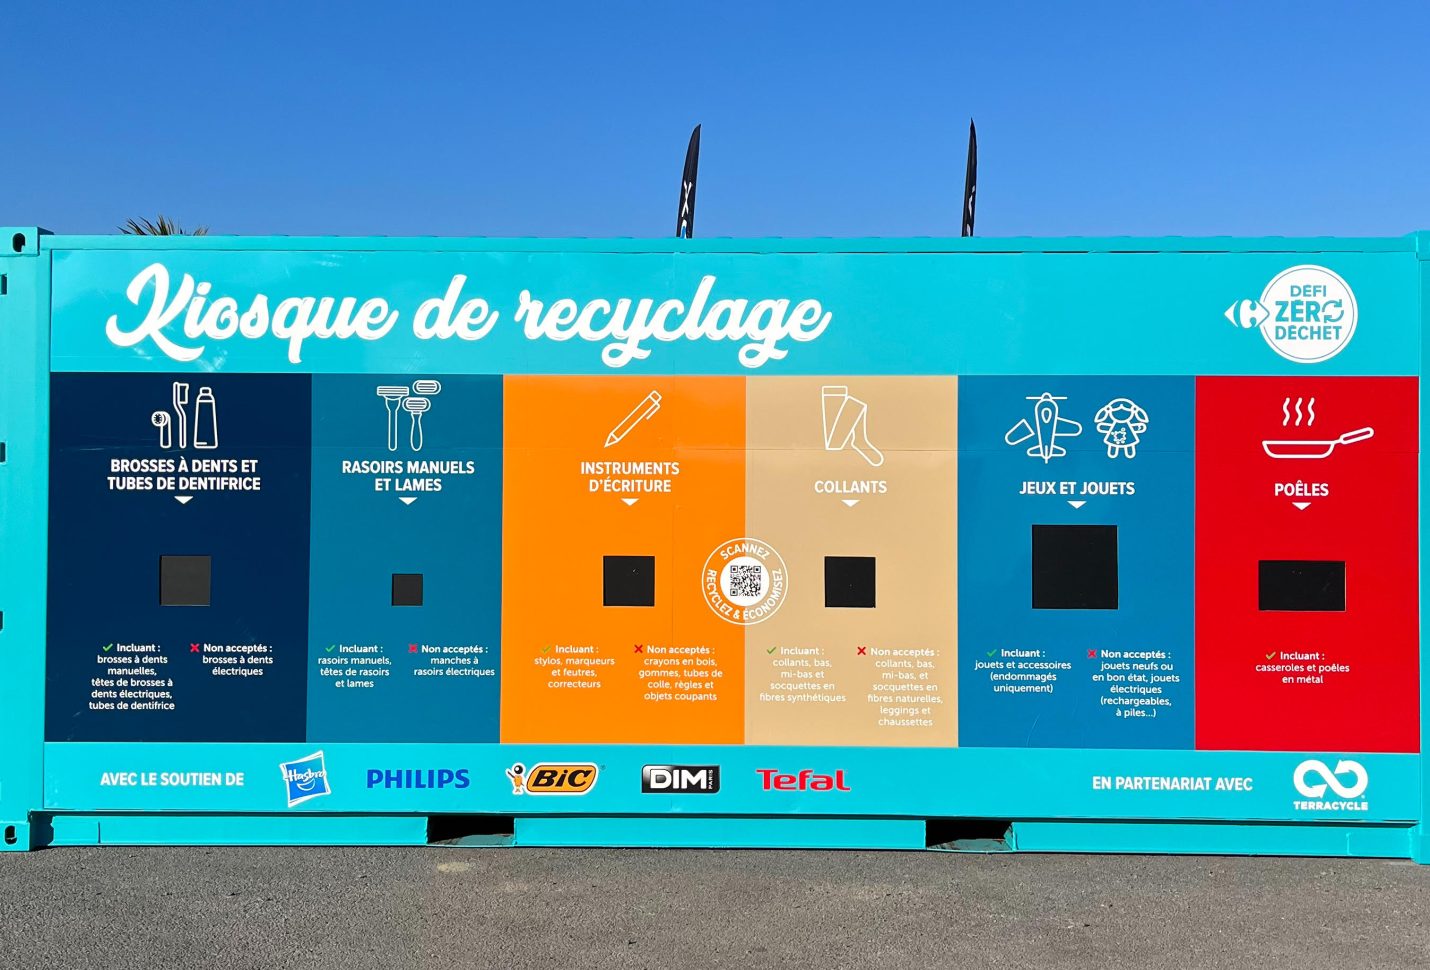 Carrefour, six partners team up for launching recycling kiosks in France